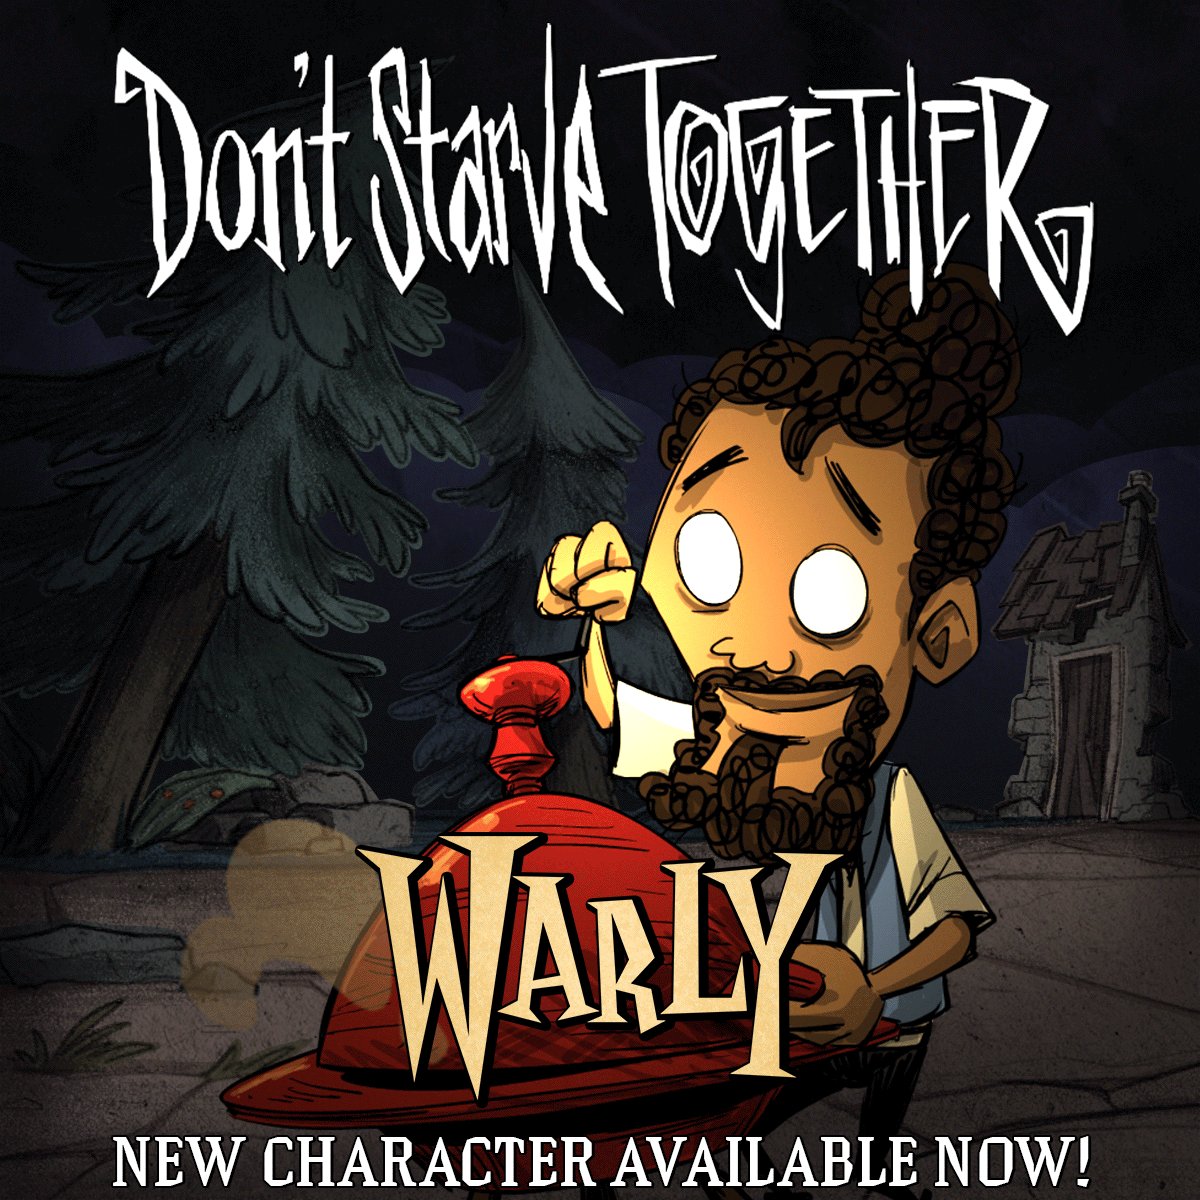 Klei on Twitter: "Warly is now playable (For FREE) in Don't Starve  Together! Check out our post with all the details and info on who will be  our NEXT character refresh! https://t.co/gvWPNPCPNq #